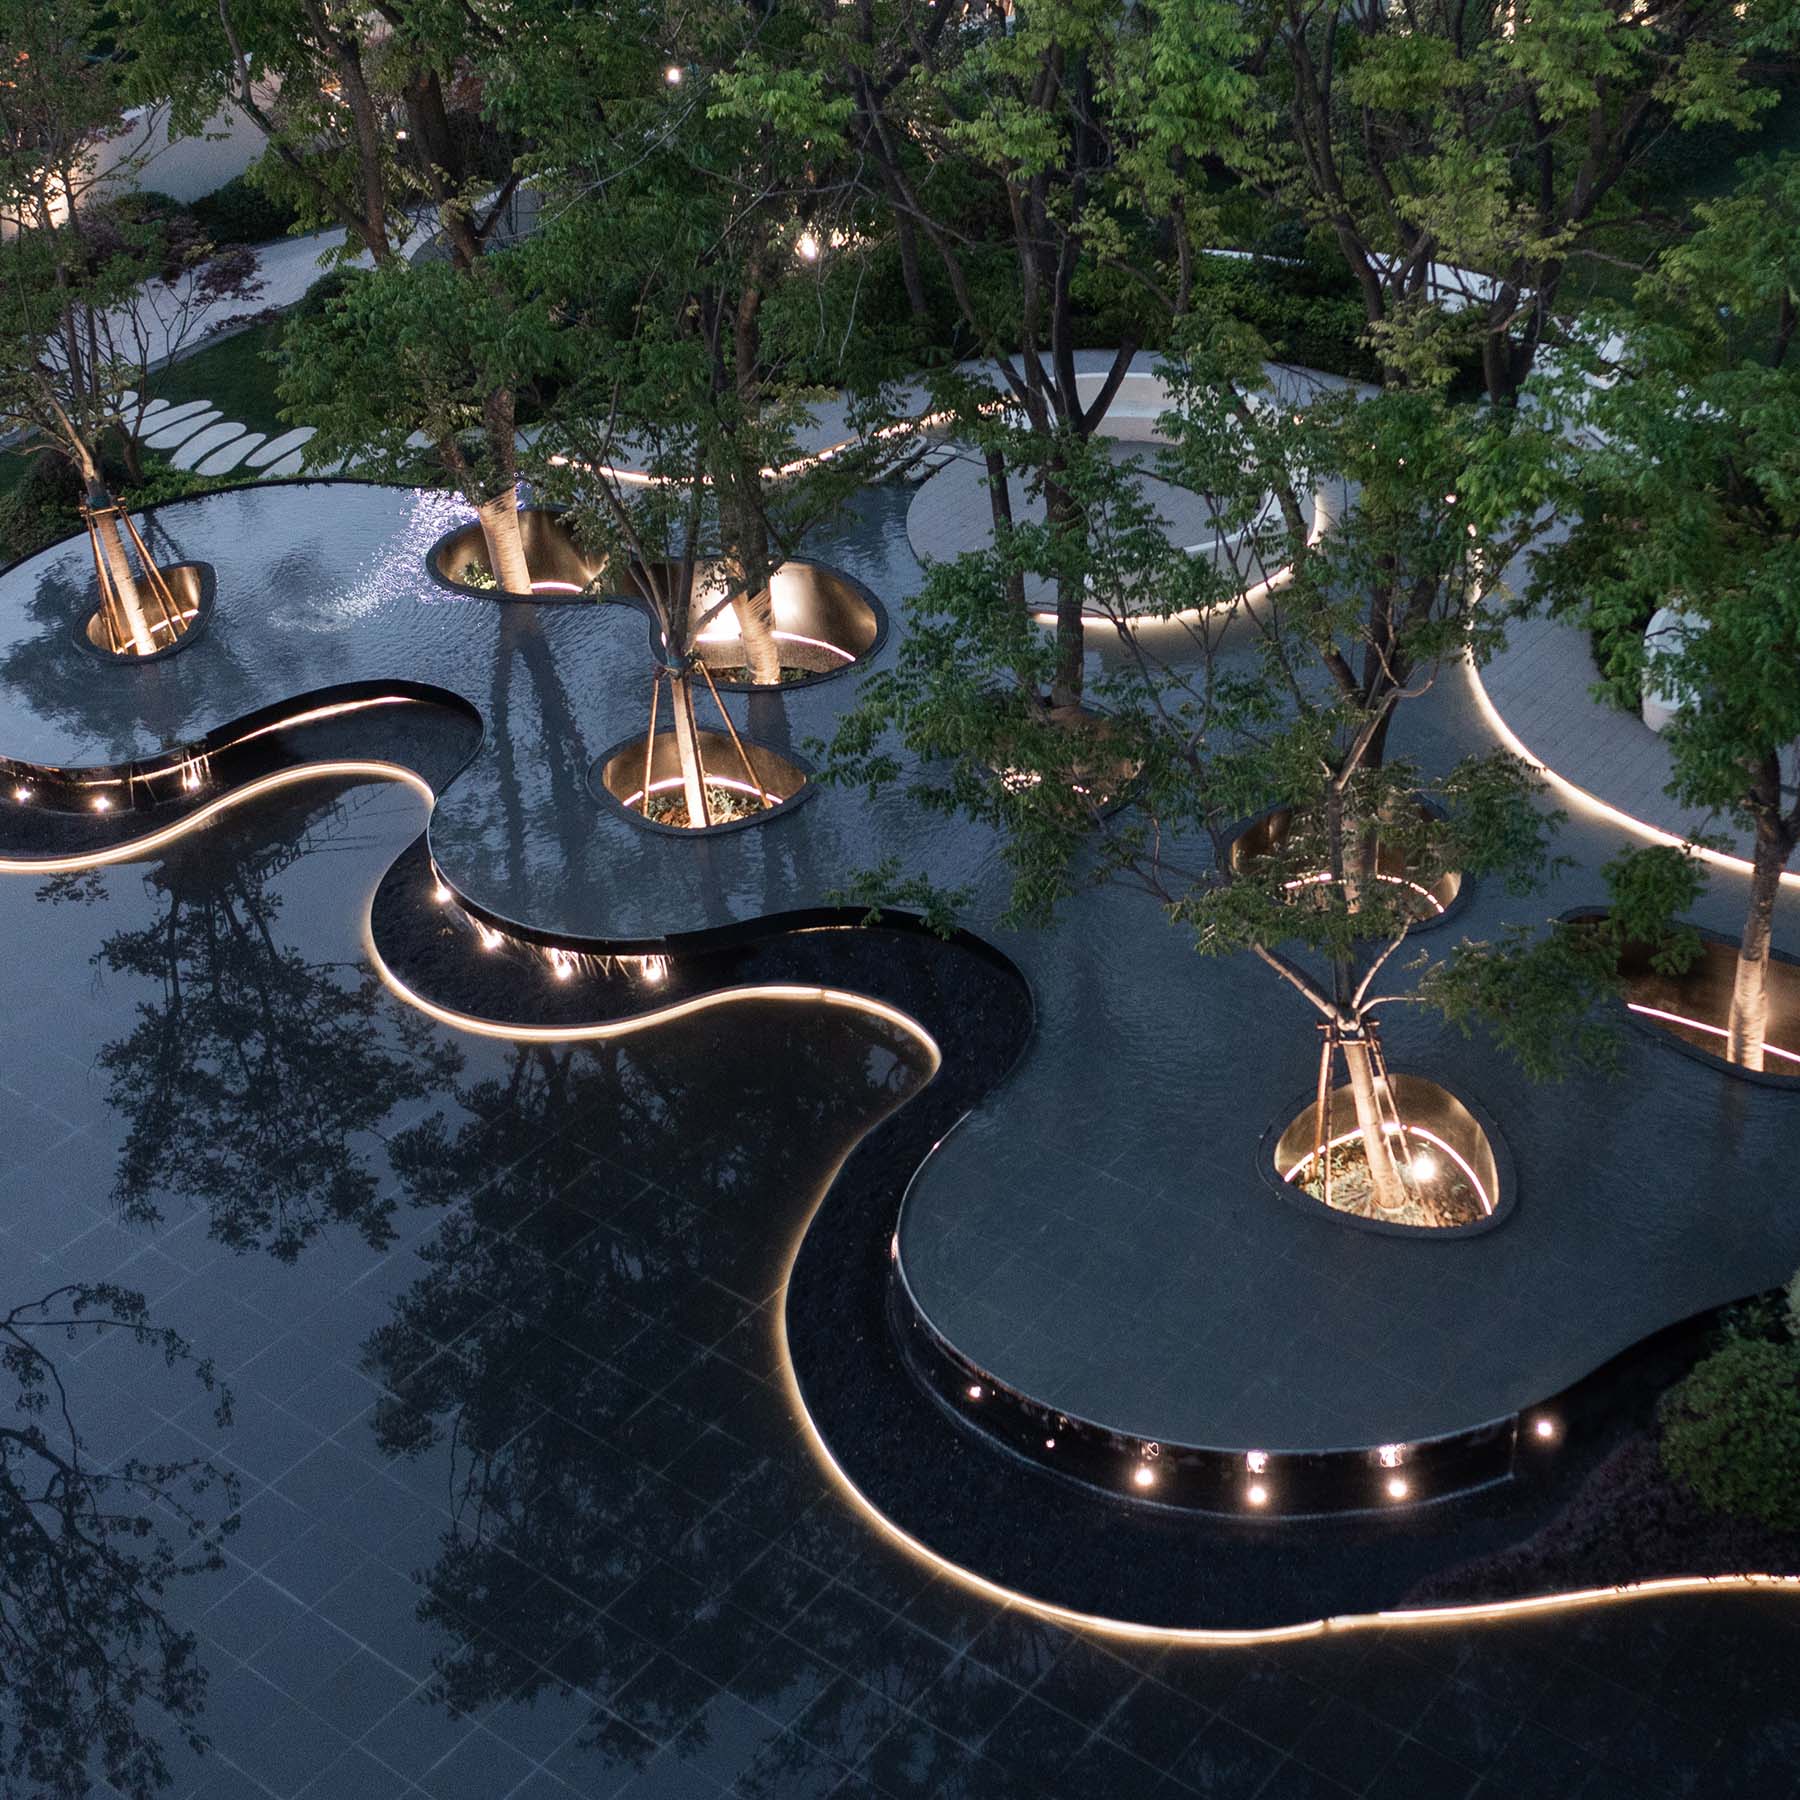 A modern landscape design that uses lighting to highlight curves.